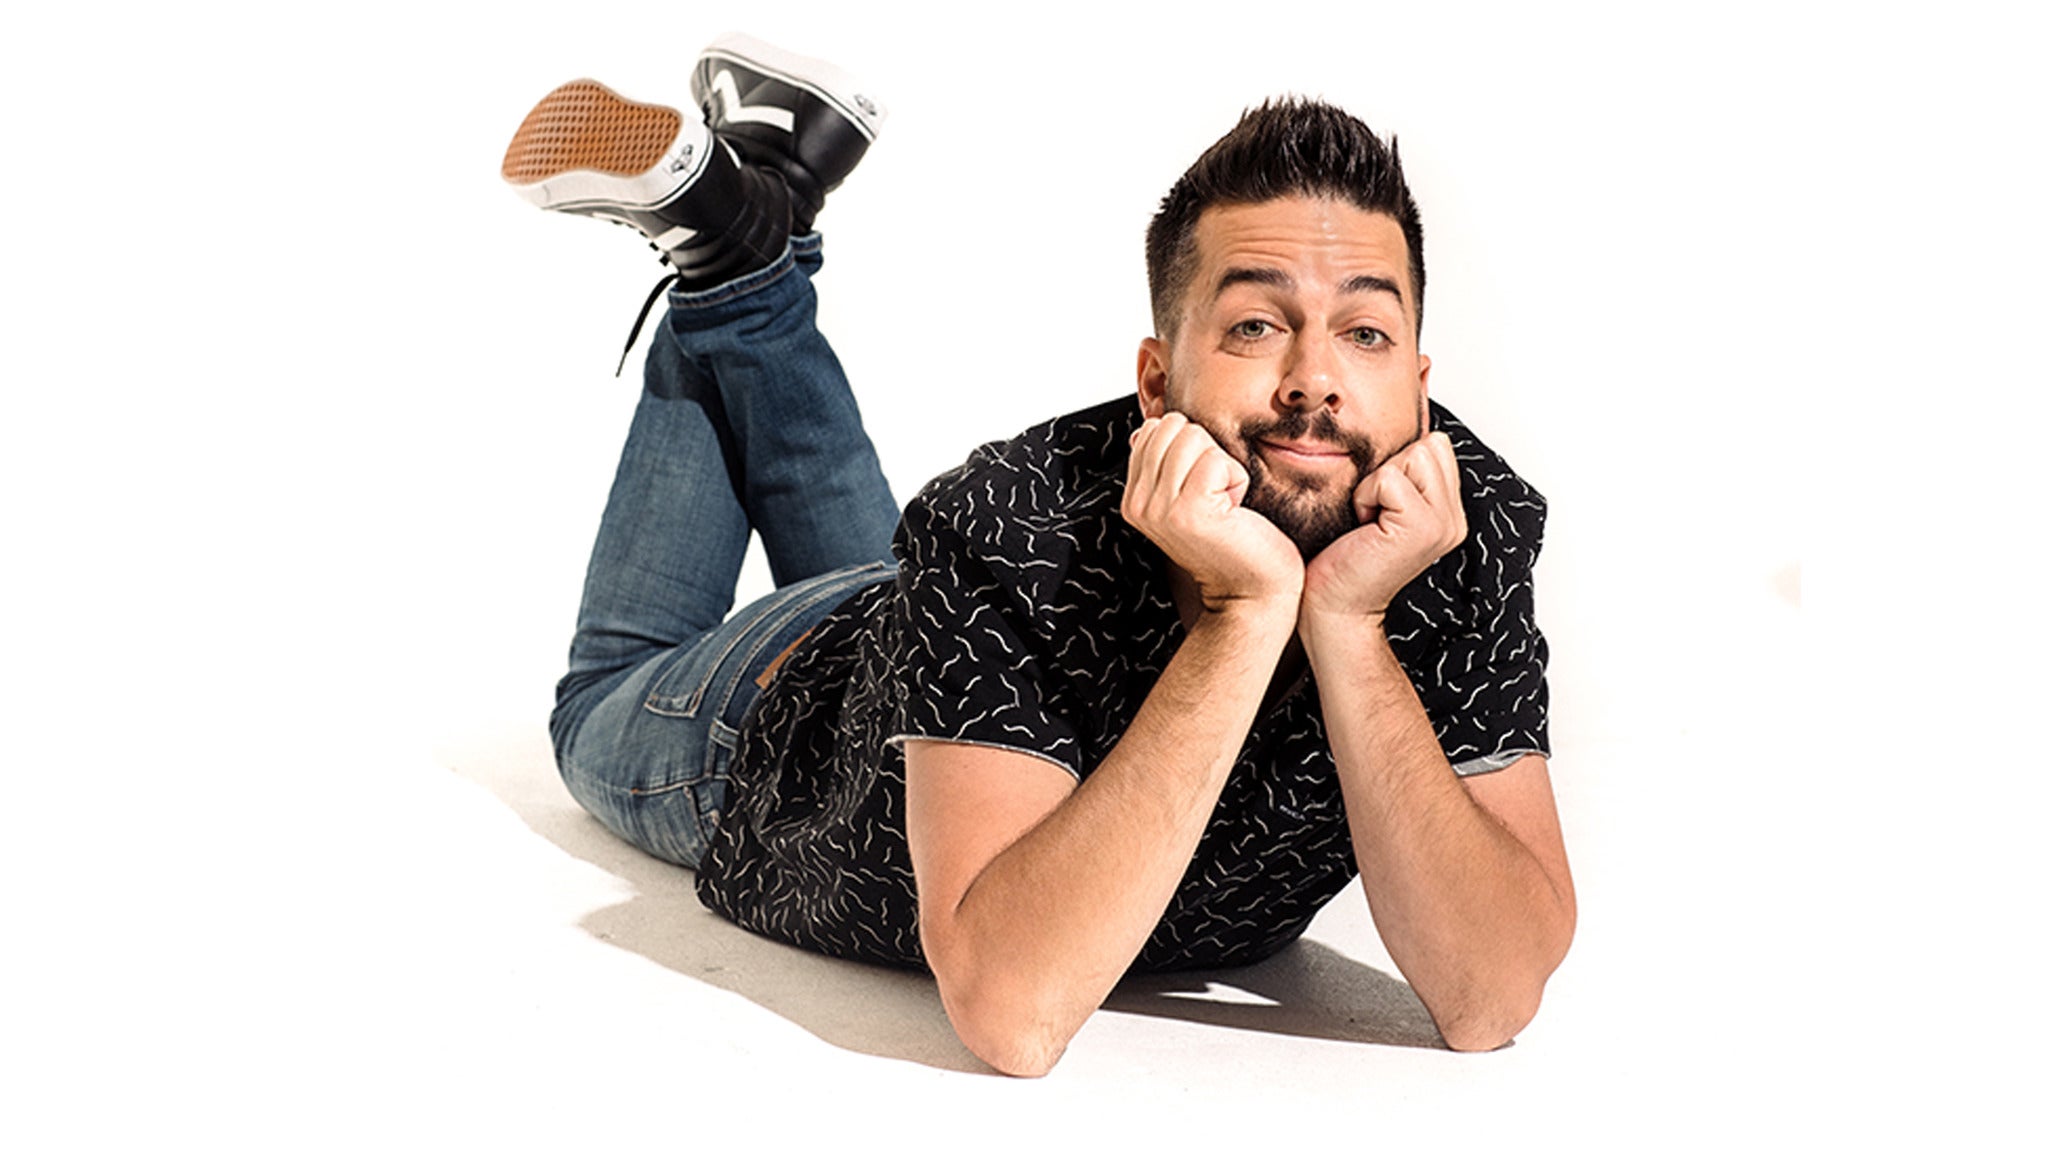 John Crist: Fresh Cuts Comedy Tour in Asheville promo photo for VIP Package presale offer code